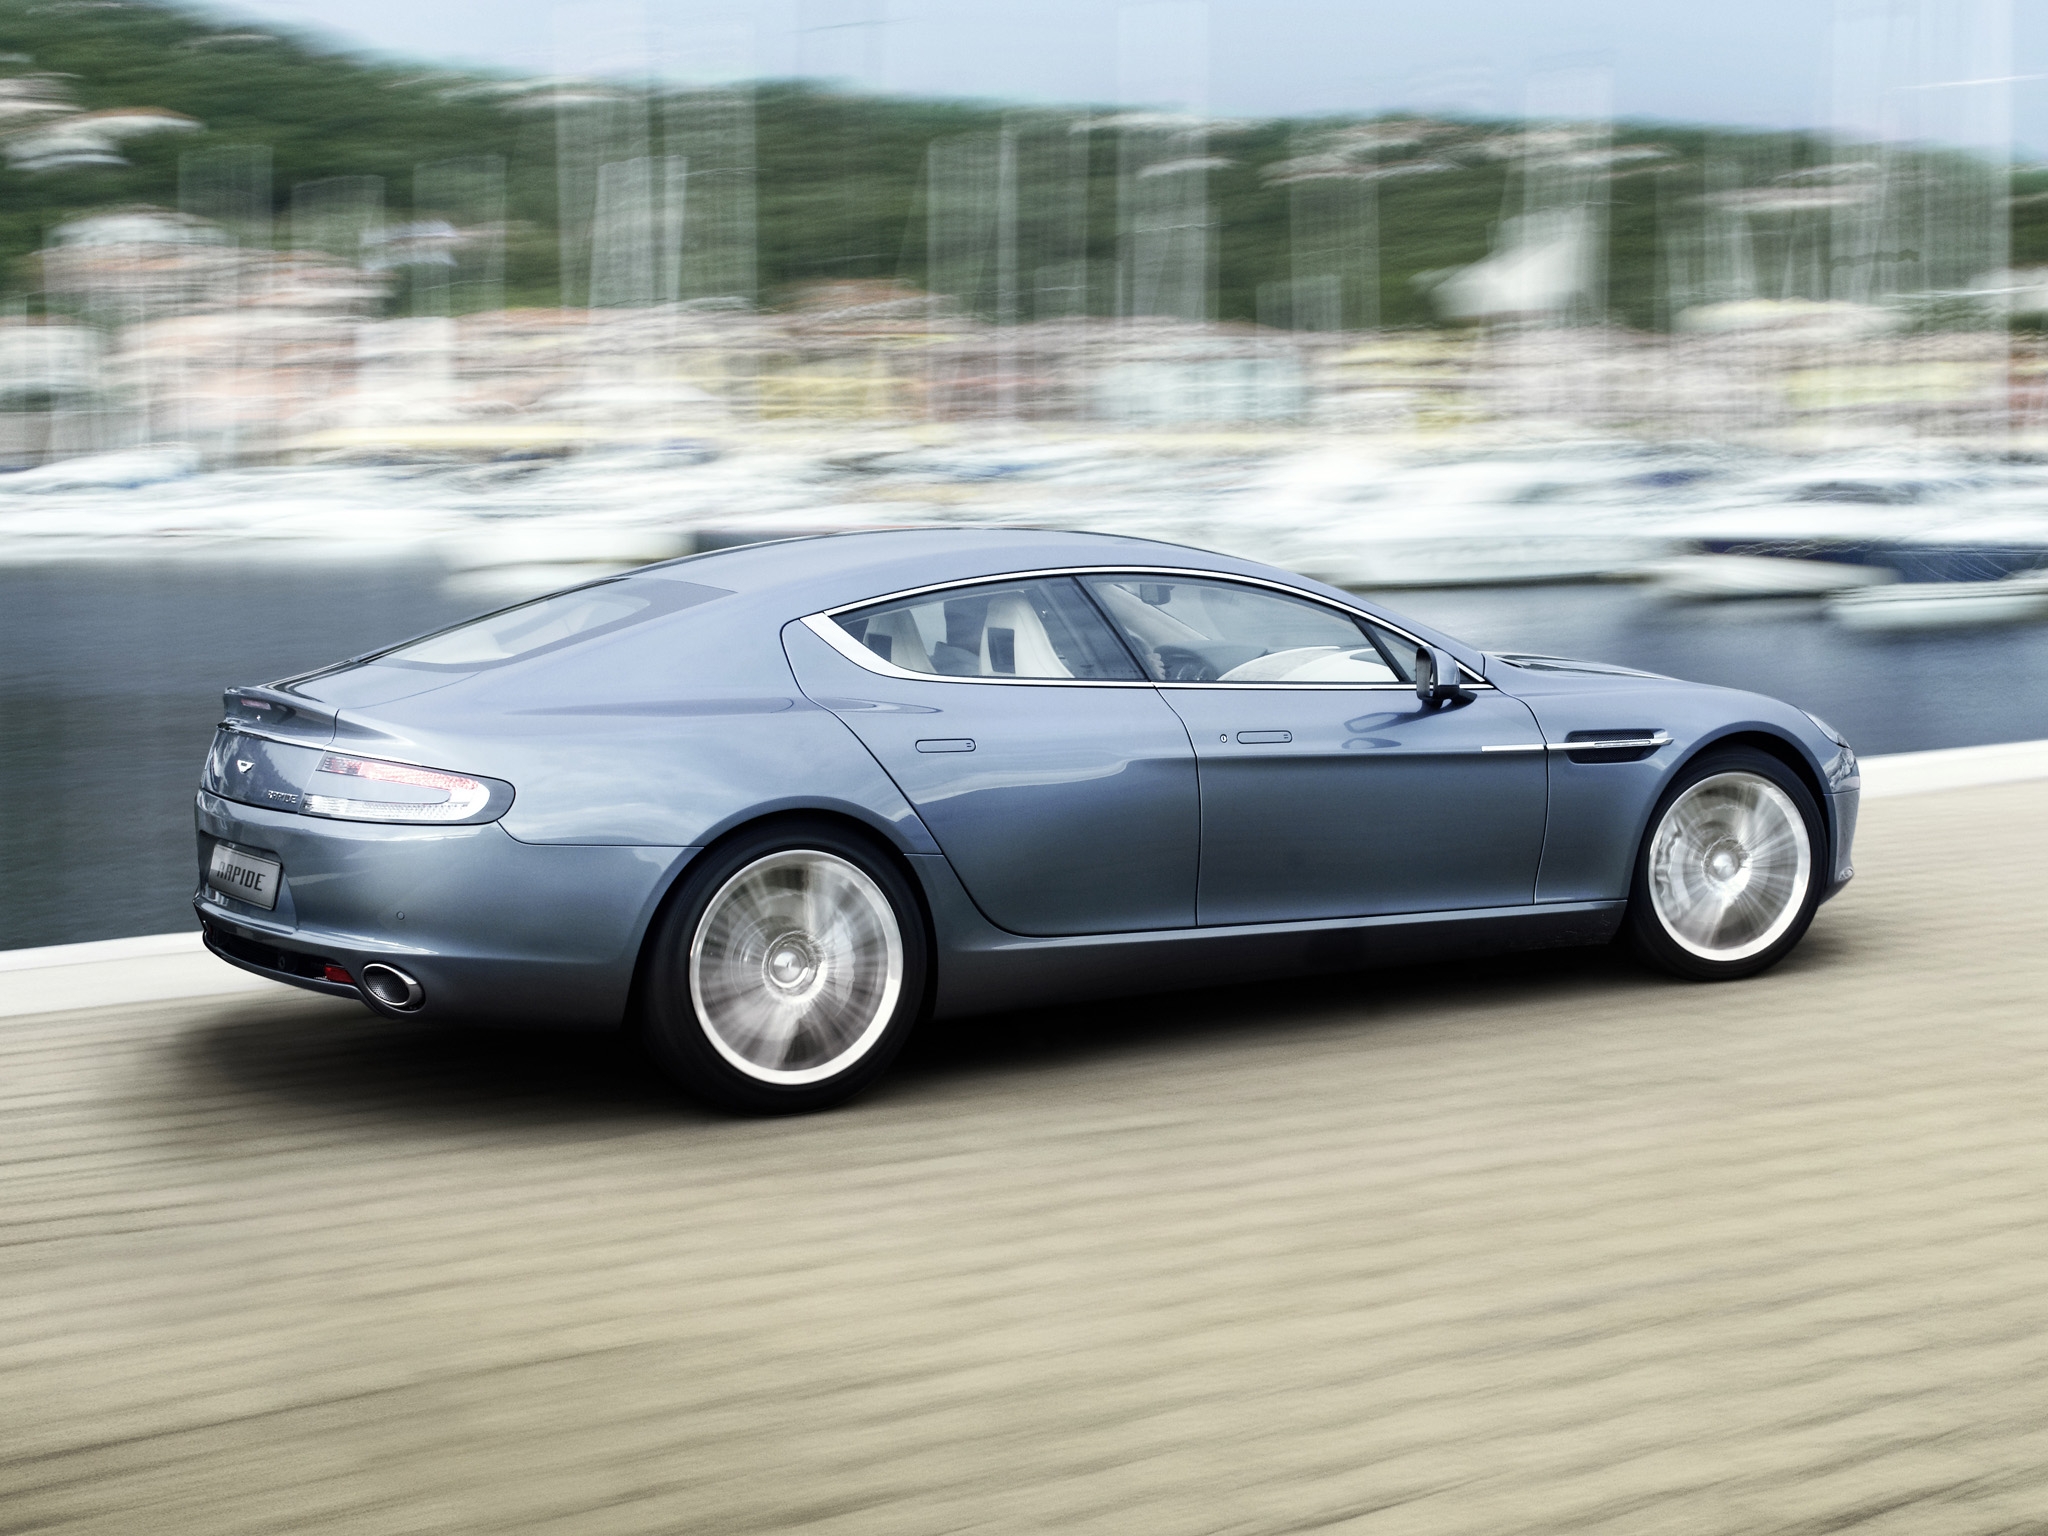 aston martin, cars, blue, side view, speed, style, 2009, rapide Full HD